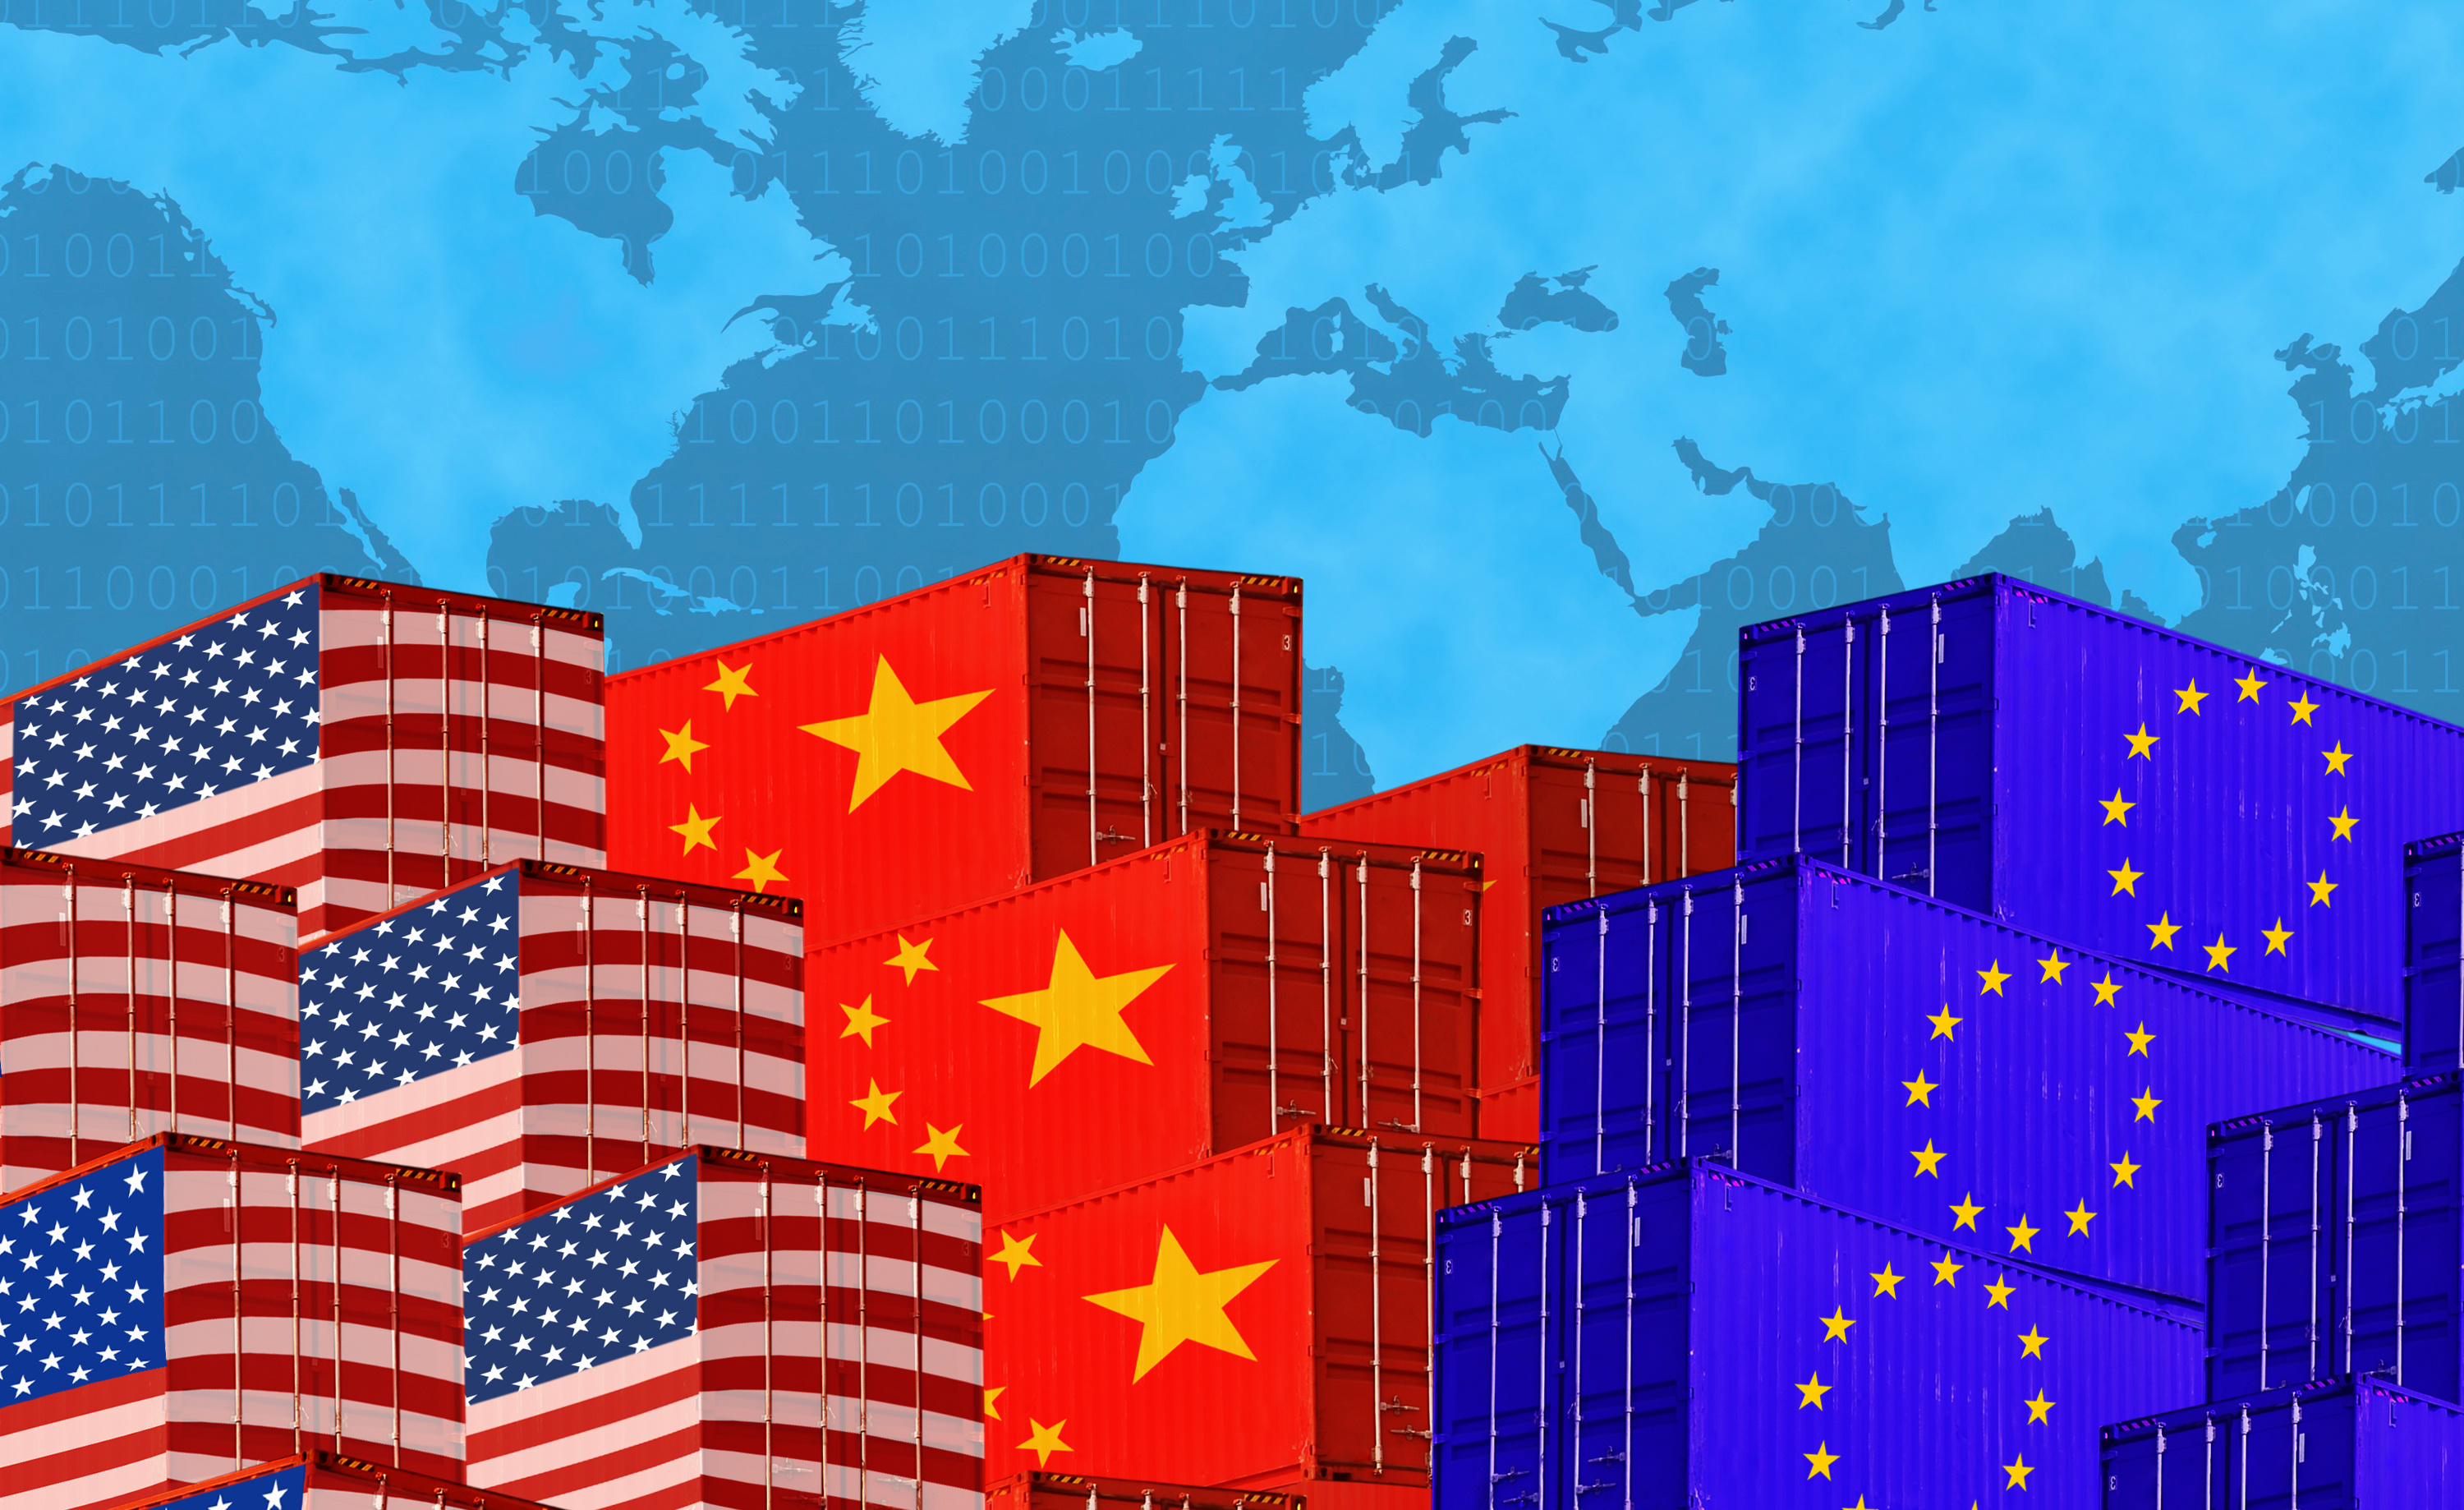 China has overtaken the US and become the European Union's largest trading partner